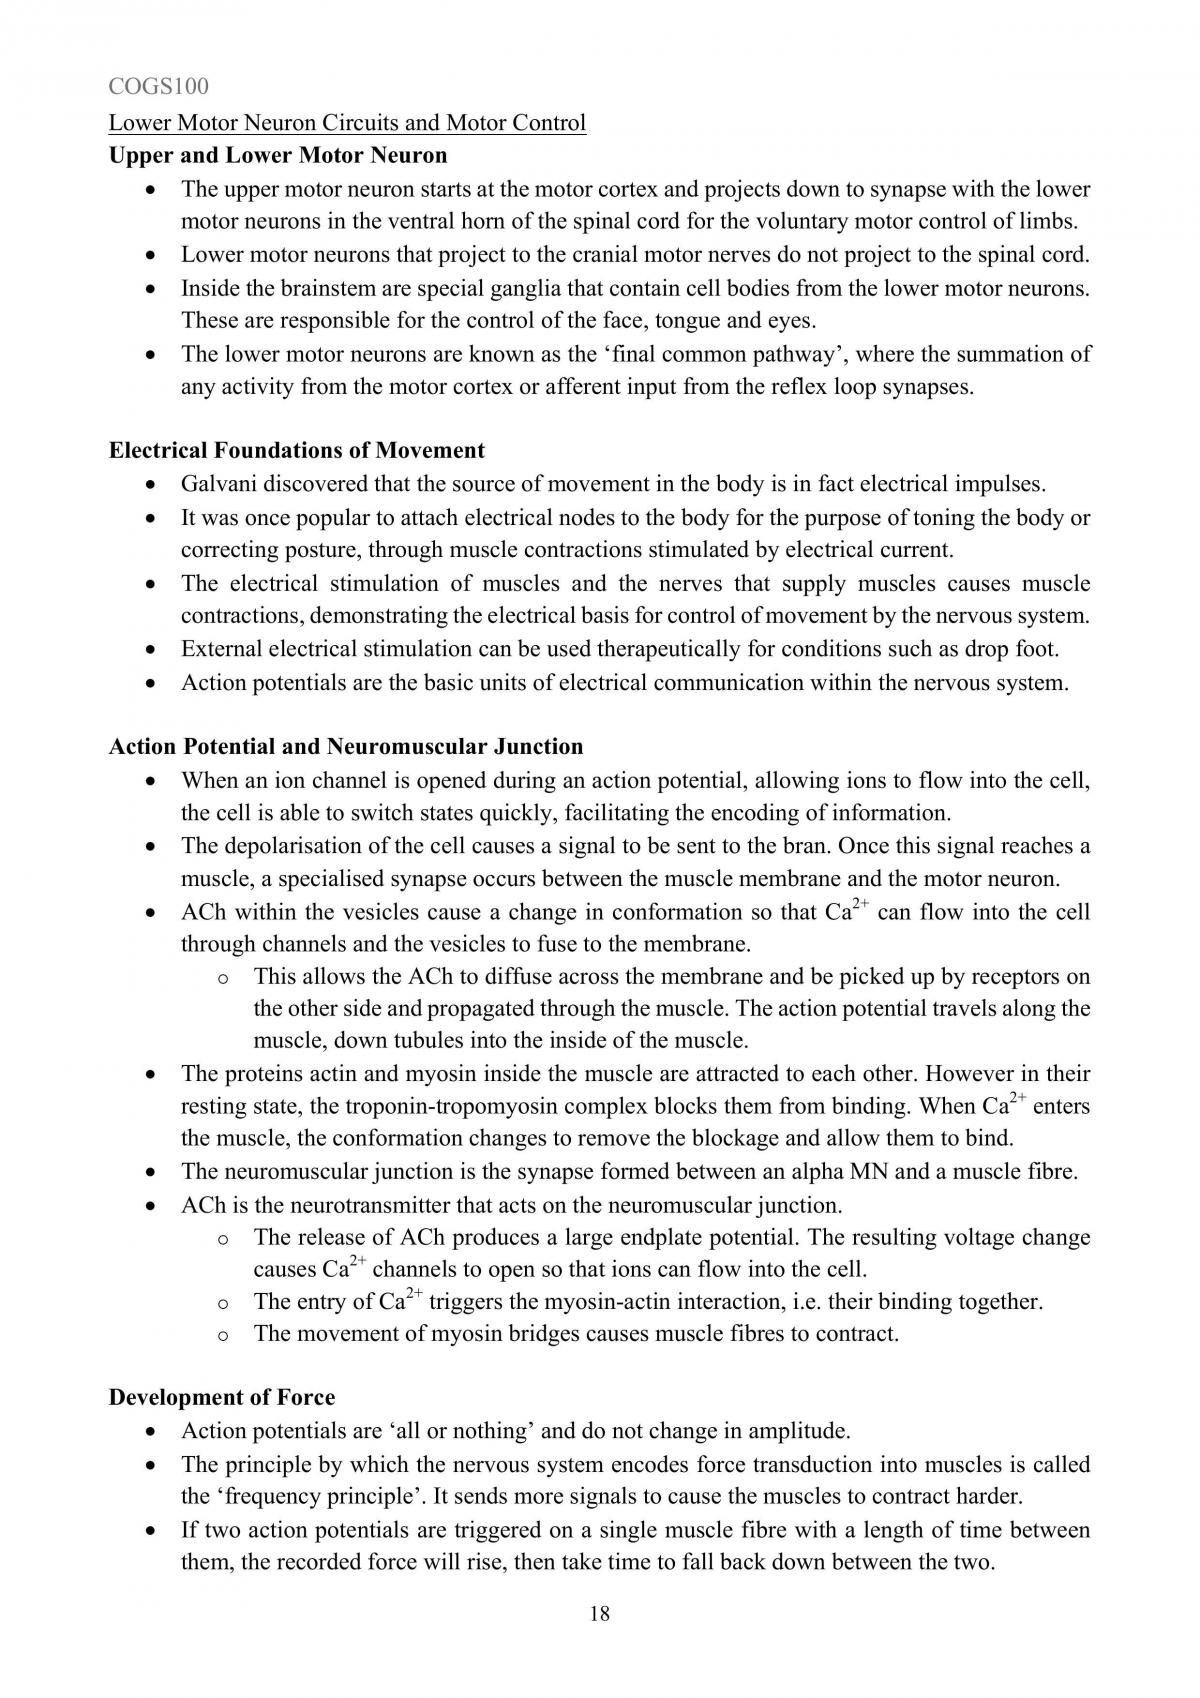 COGS100 Introduction to Cognitive and Brain Sciences Notes - Page 18